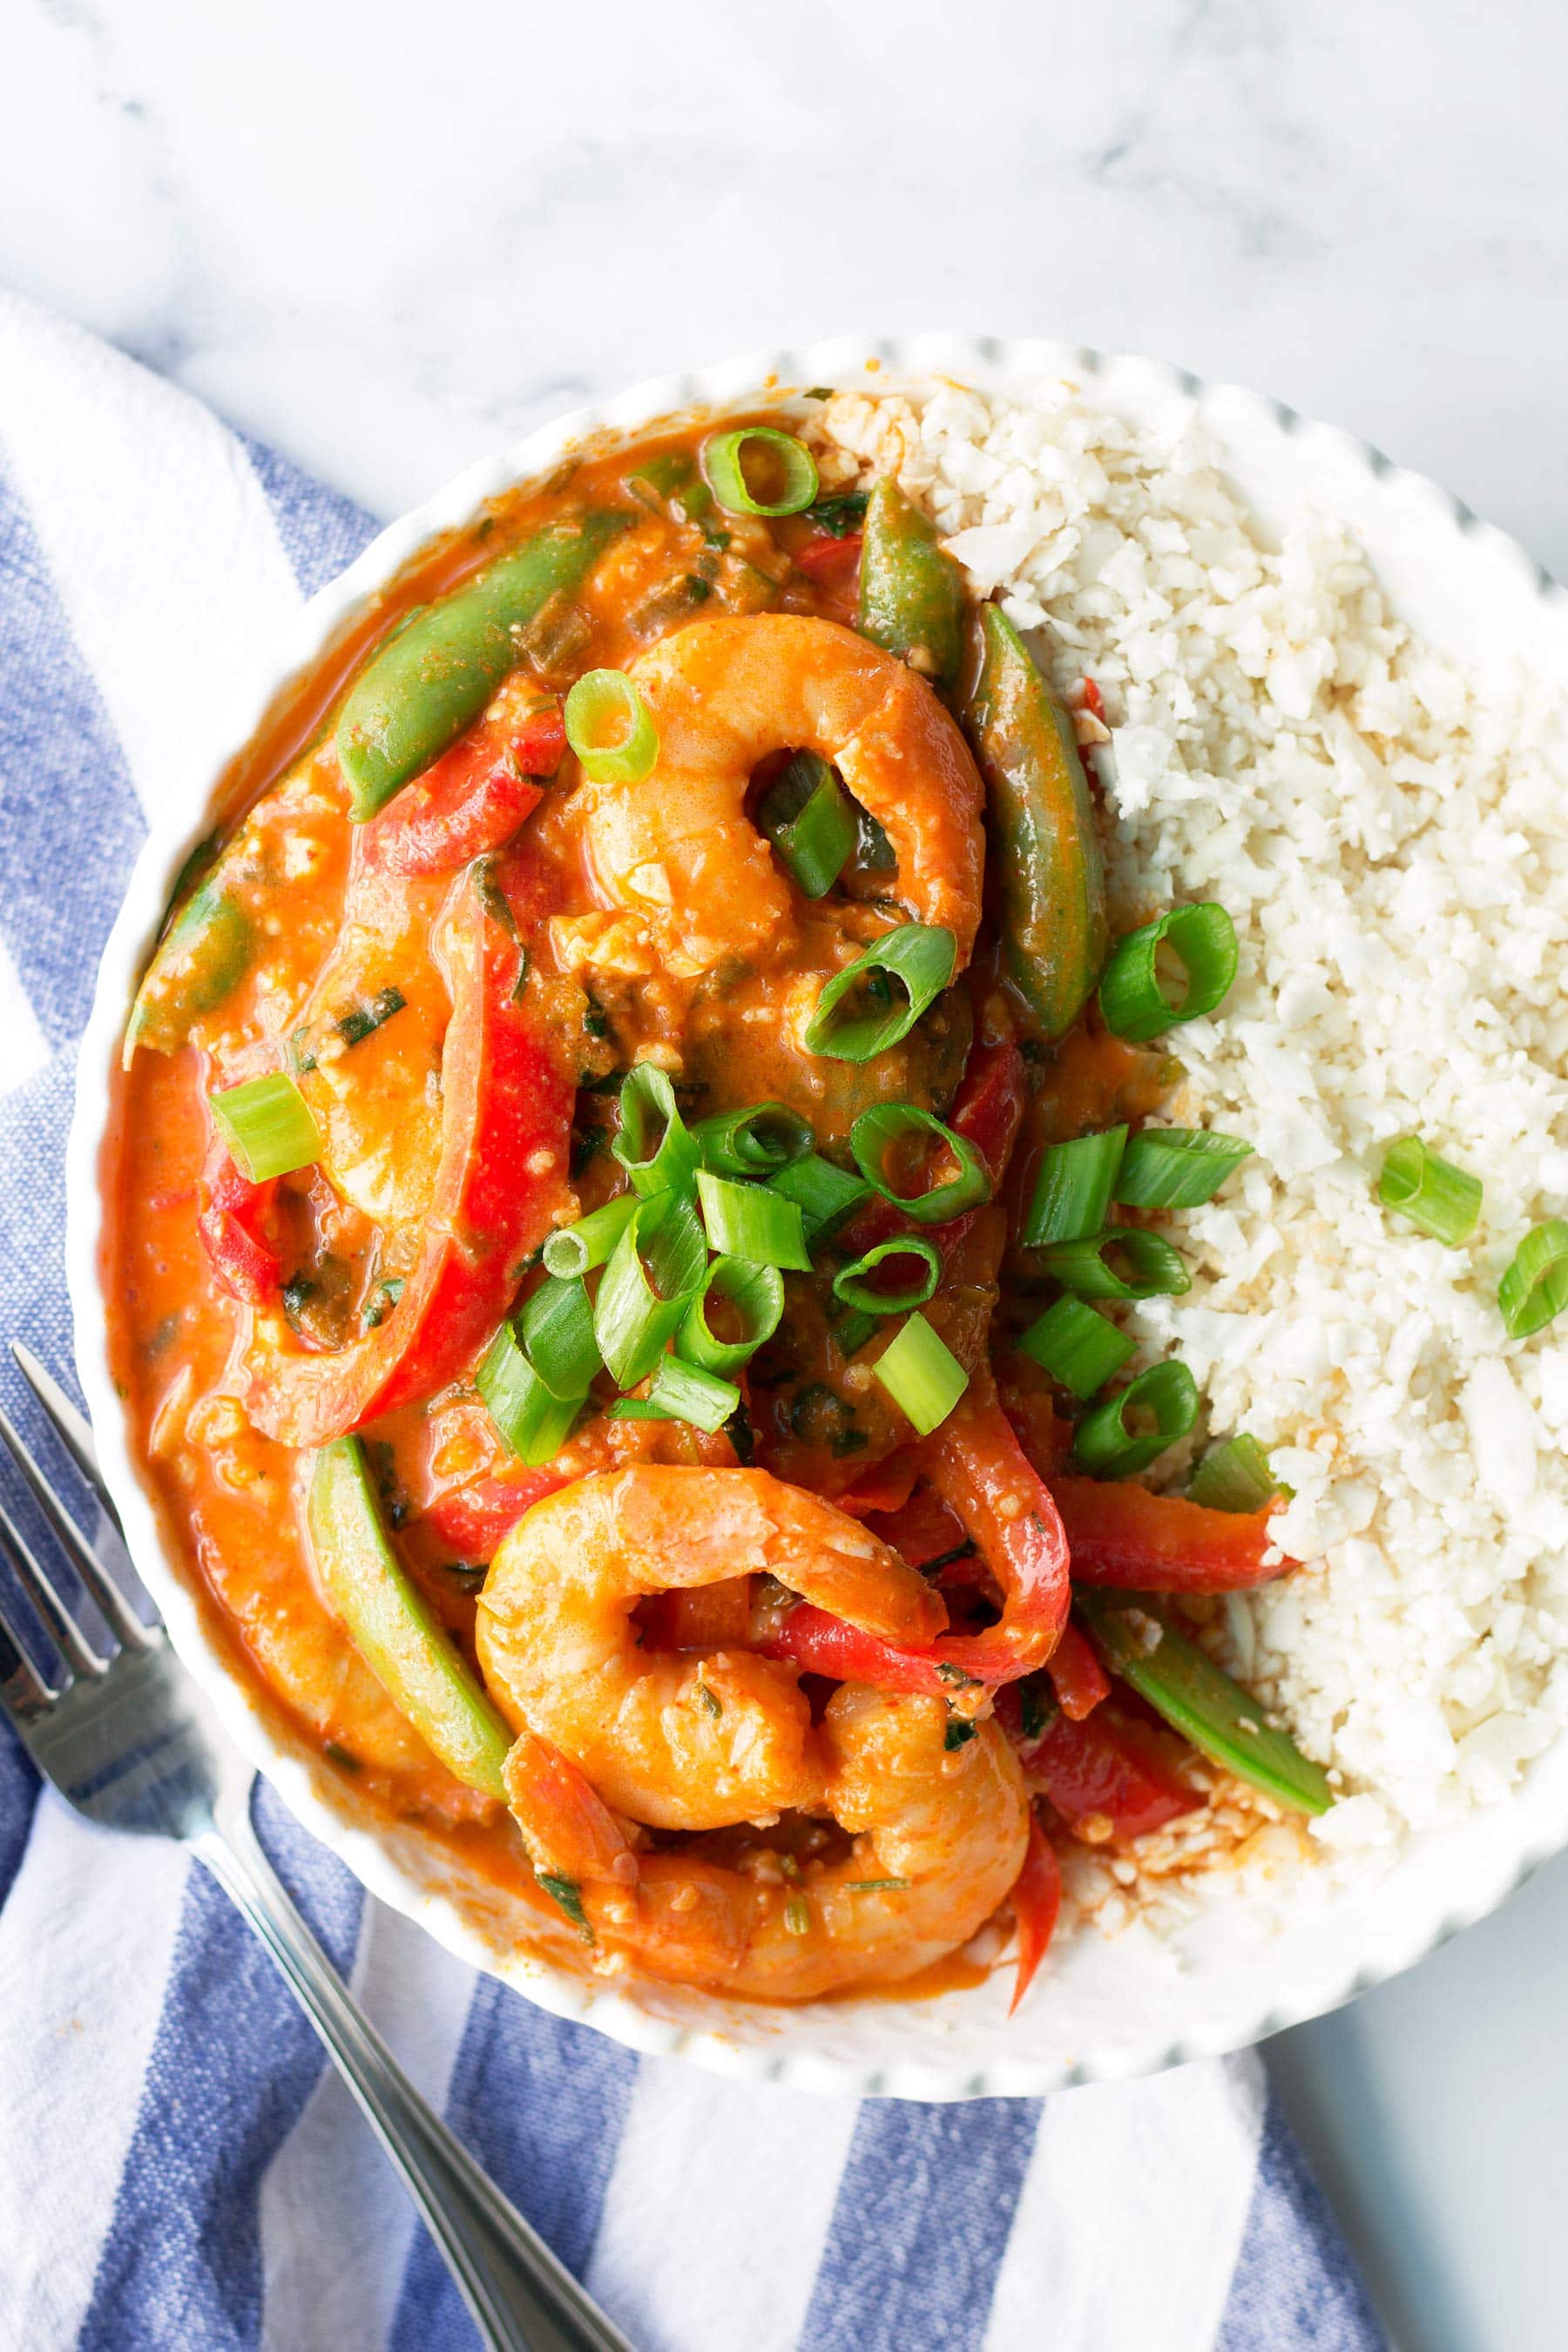 Just like takeout but healthier and made at home in 30 minutes! This easy keto dinner recipe is paleo, Whole30, low carb, gluten free, and dairy free! Perfect for a quick healthy weeknight meal! #paleodinner #whole30dinner #ketodinner #shrimp #shrimprecipe #shrimpdinner #thaicurry #healthyeating #healthydinner #mealprep #mealprepideas #whole30recipes #lowcarb #paleorecipes #glutenfreedinner #whole30lunch #ketolunch #paleo #coconutmilk #thaieggplant